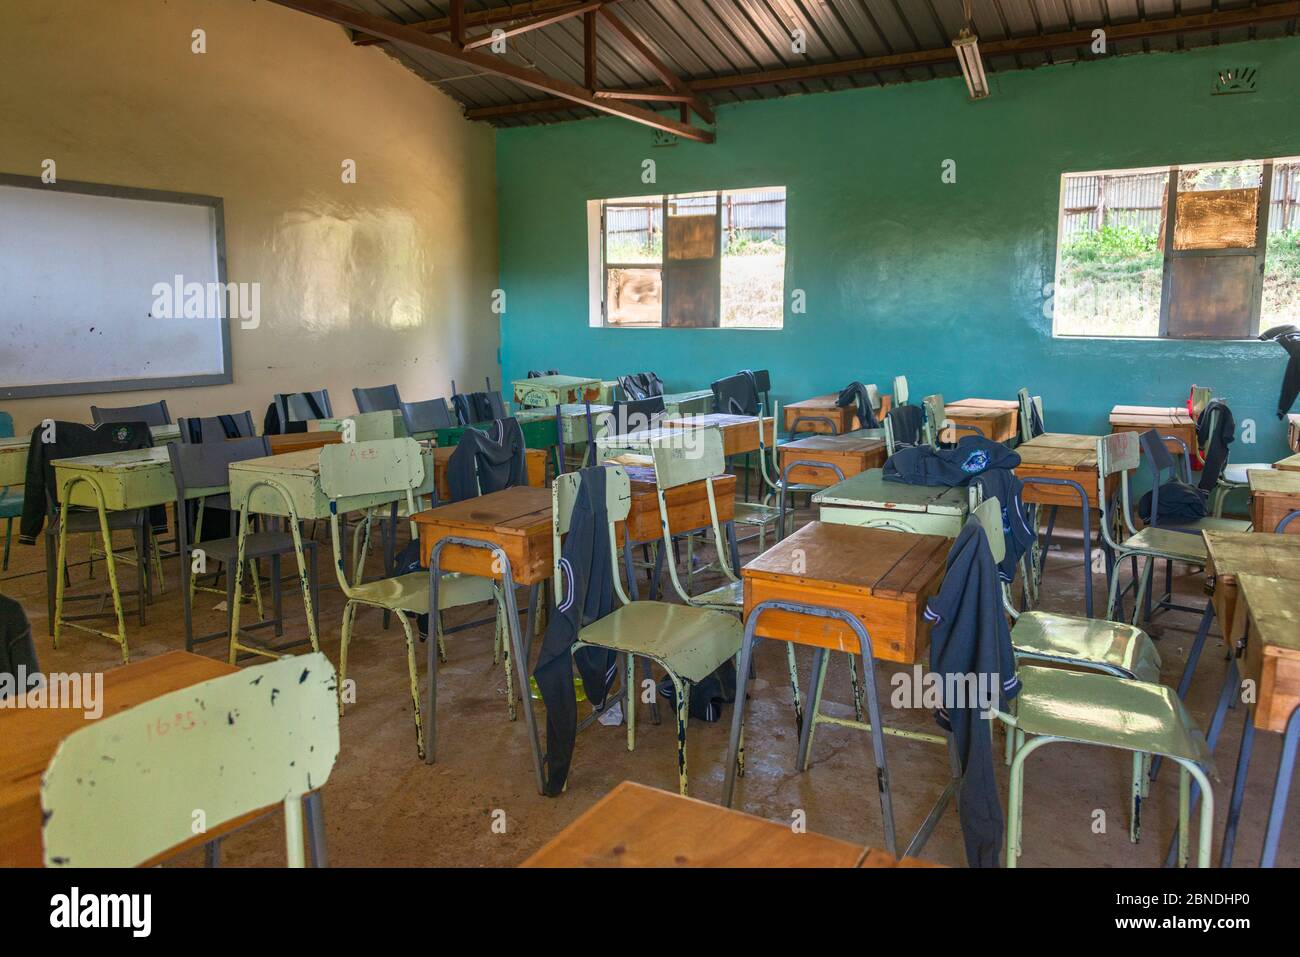 School room for secondary students in Kenya Stock Photo